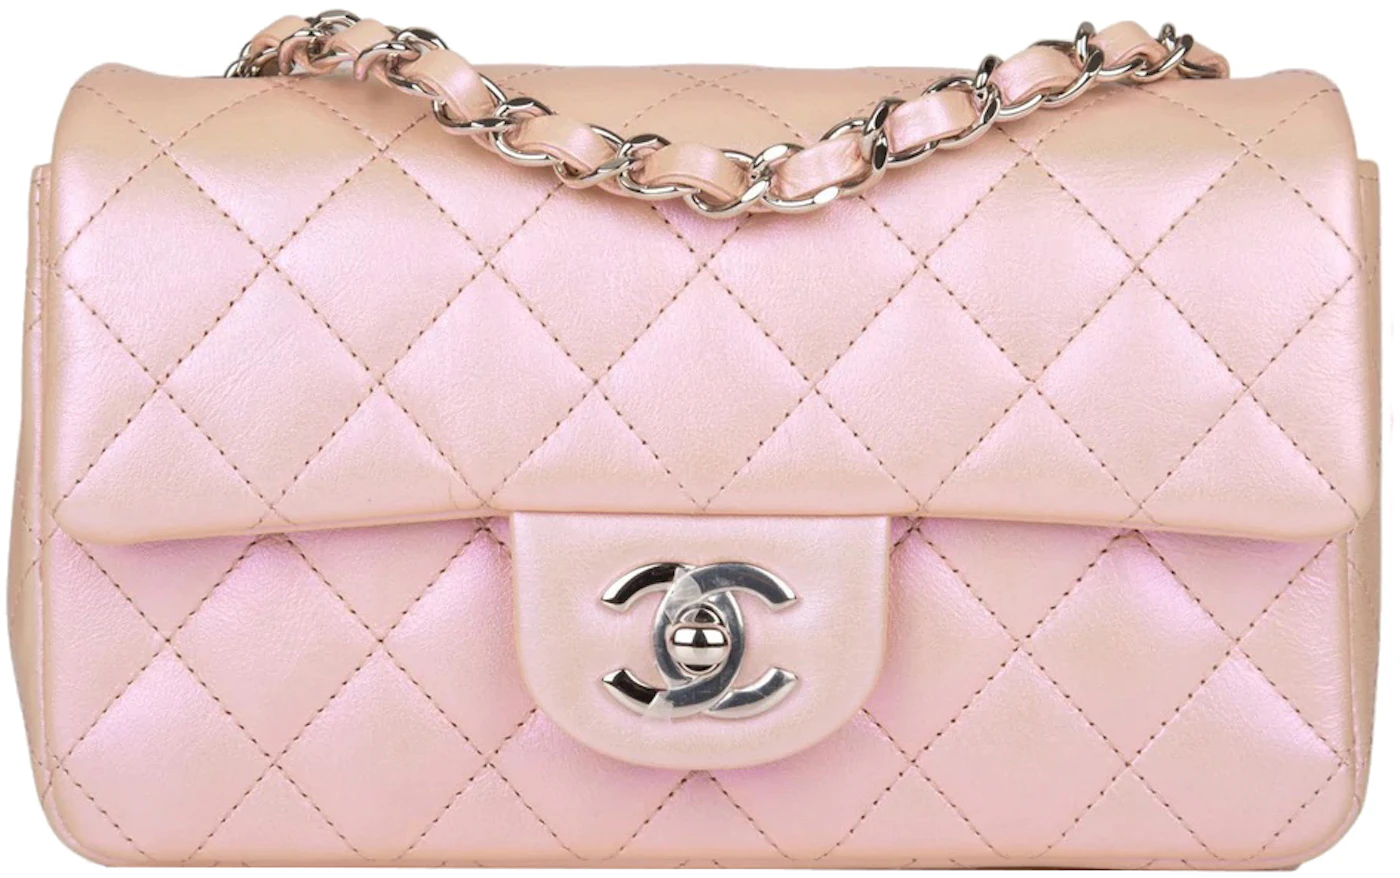 Chanel Mini Rectangular Flap Bag 21 Pink in Calfskin Leather with